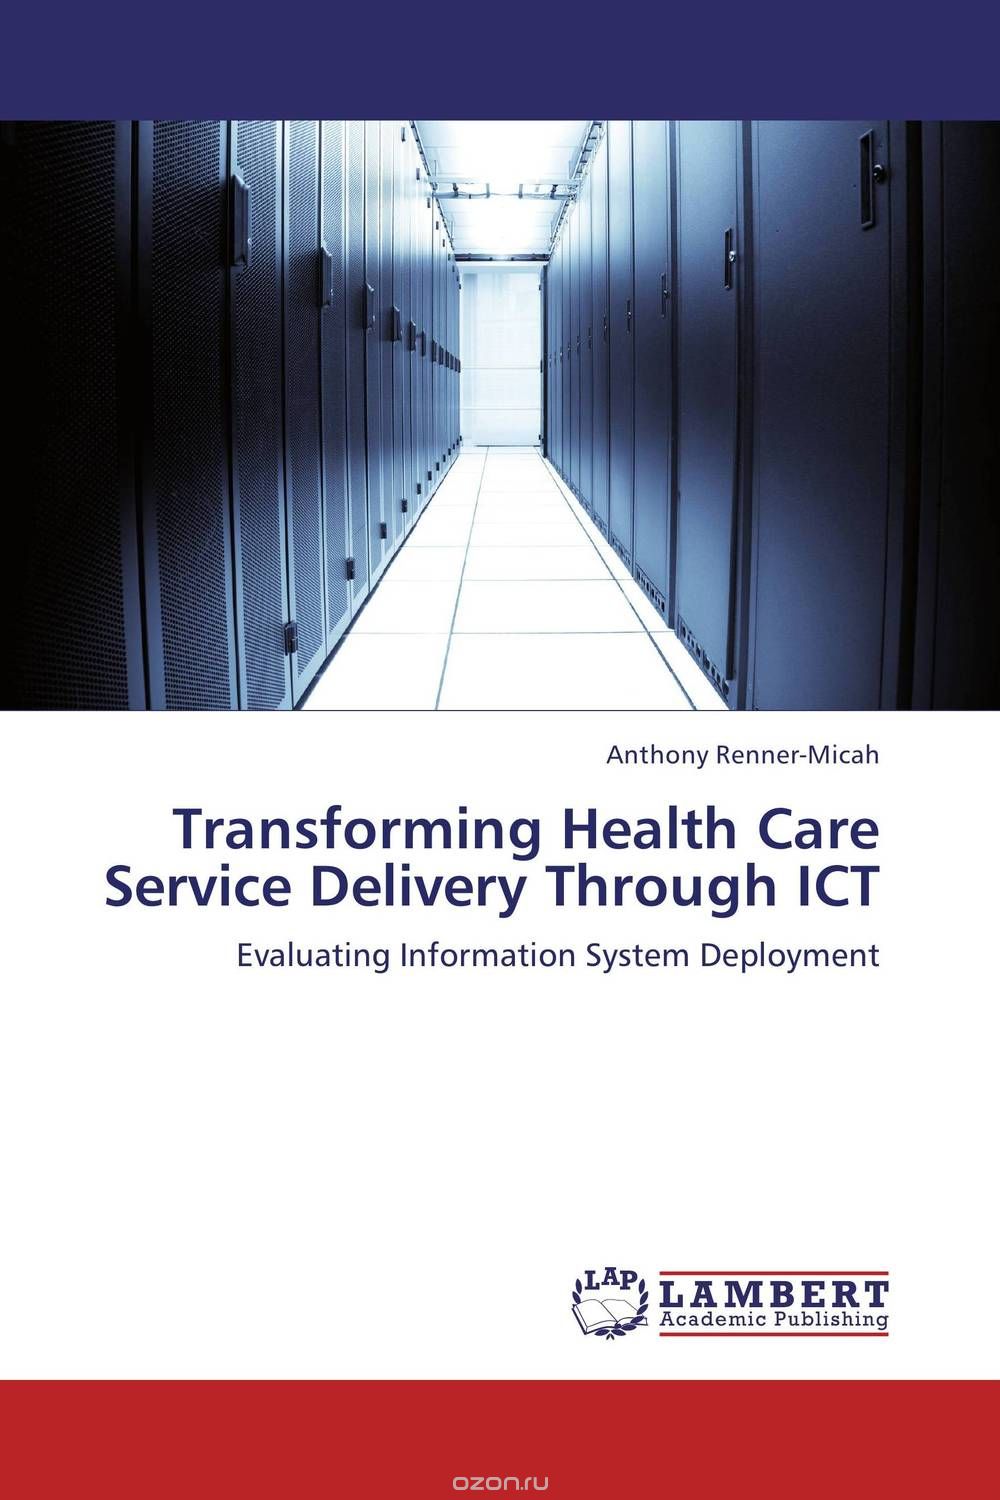 Transforming Health Care Service Delivery Through ICT